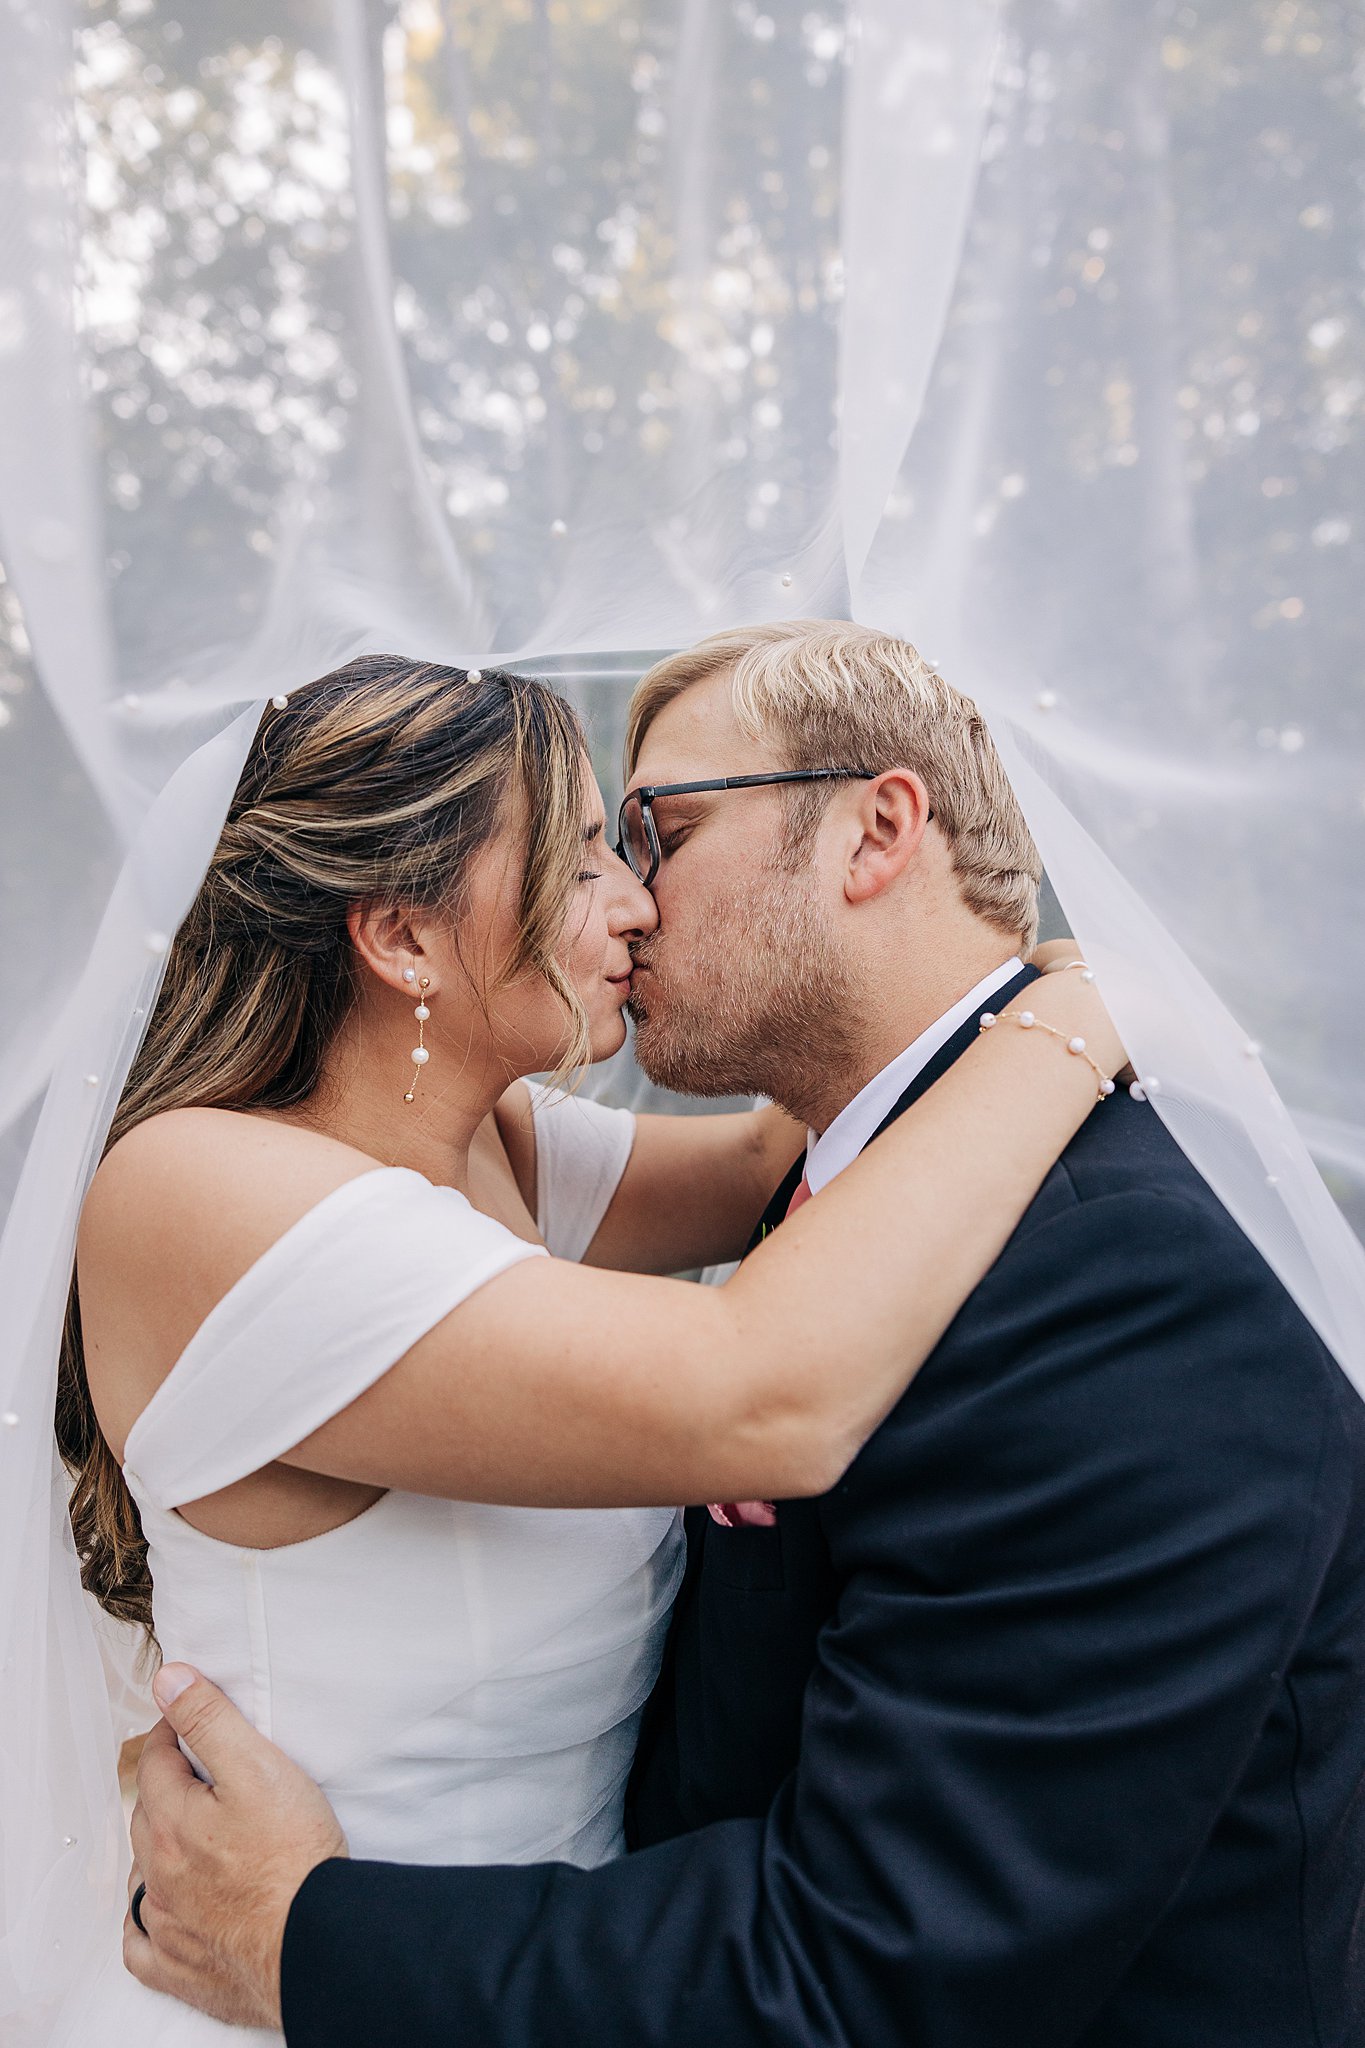 Newlyweds kiss under the veil at sunset